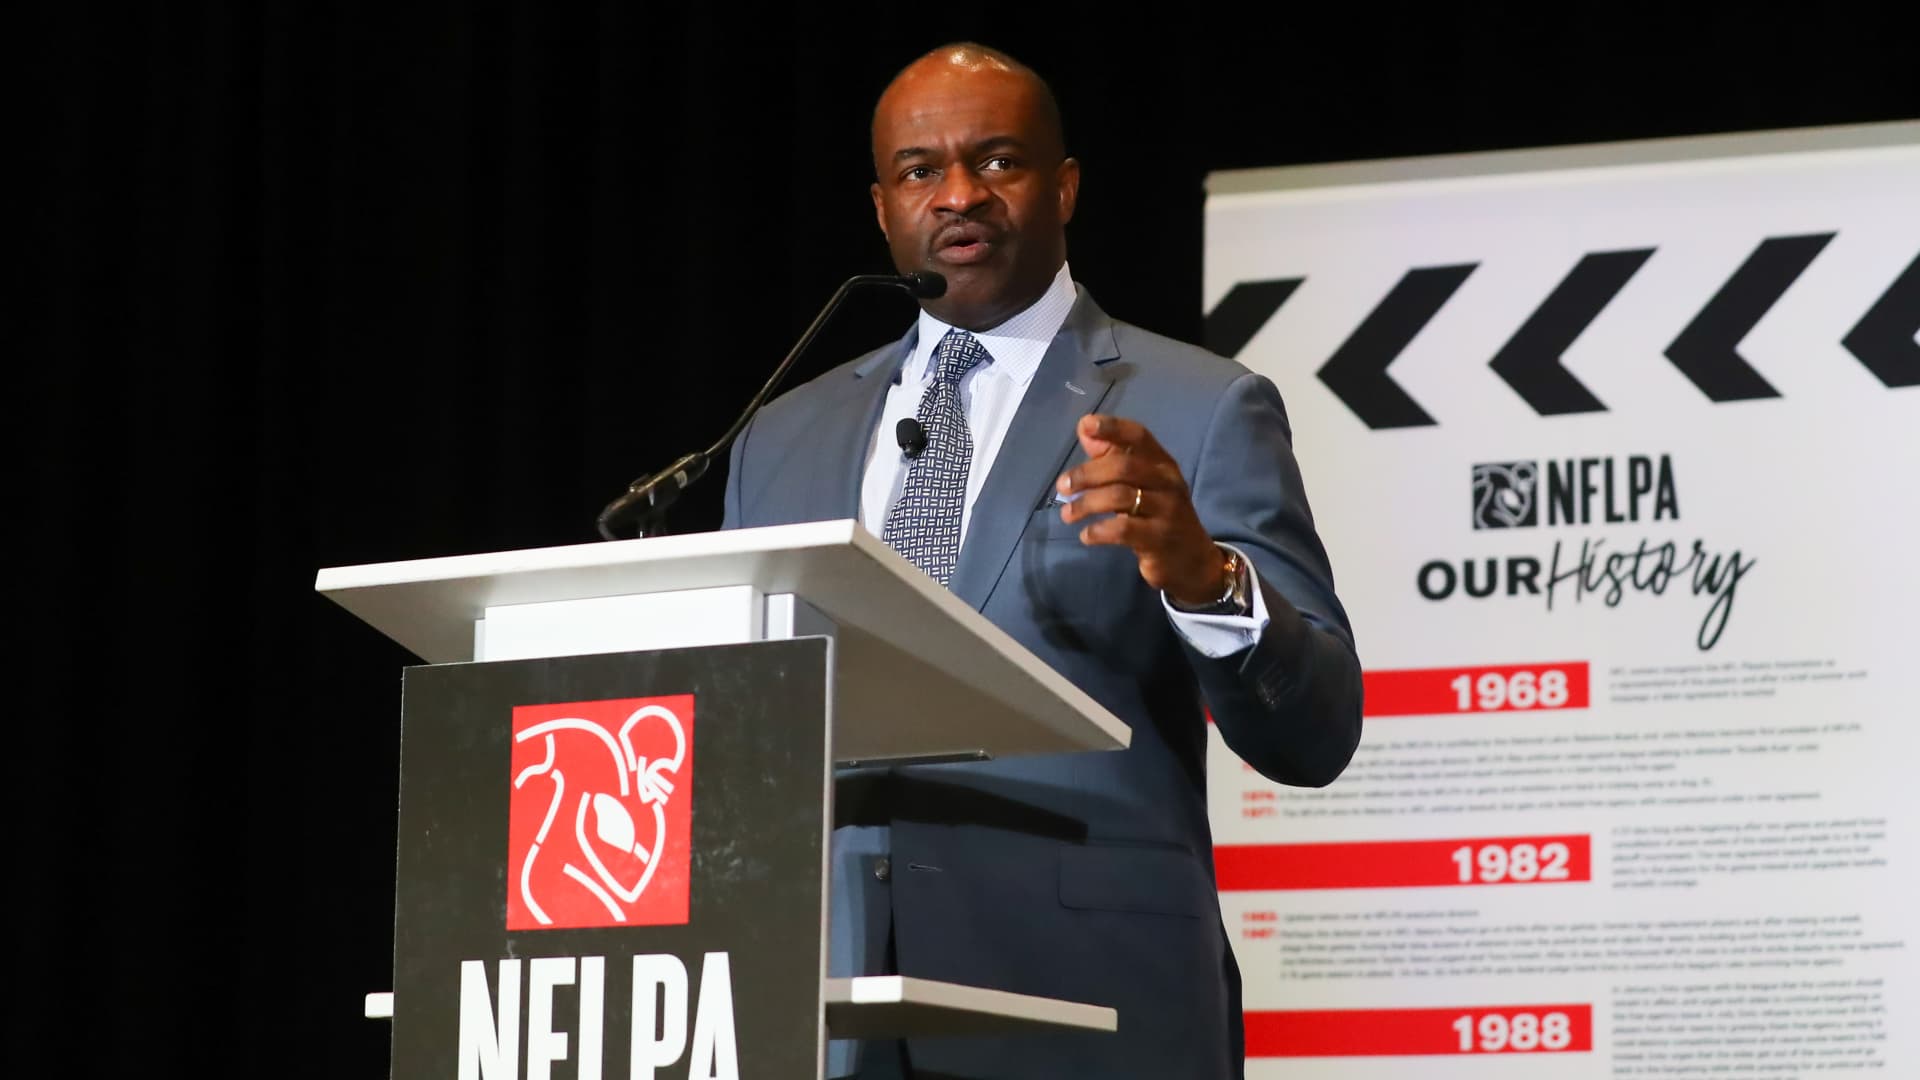 DeMaurice Smith the Executive Director of the National Football League Players Association speaks during the NFLPA press conference on January 30, 2020 at the Miami Beach Convention Center in Miami Beack, FL.